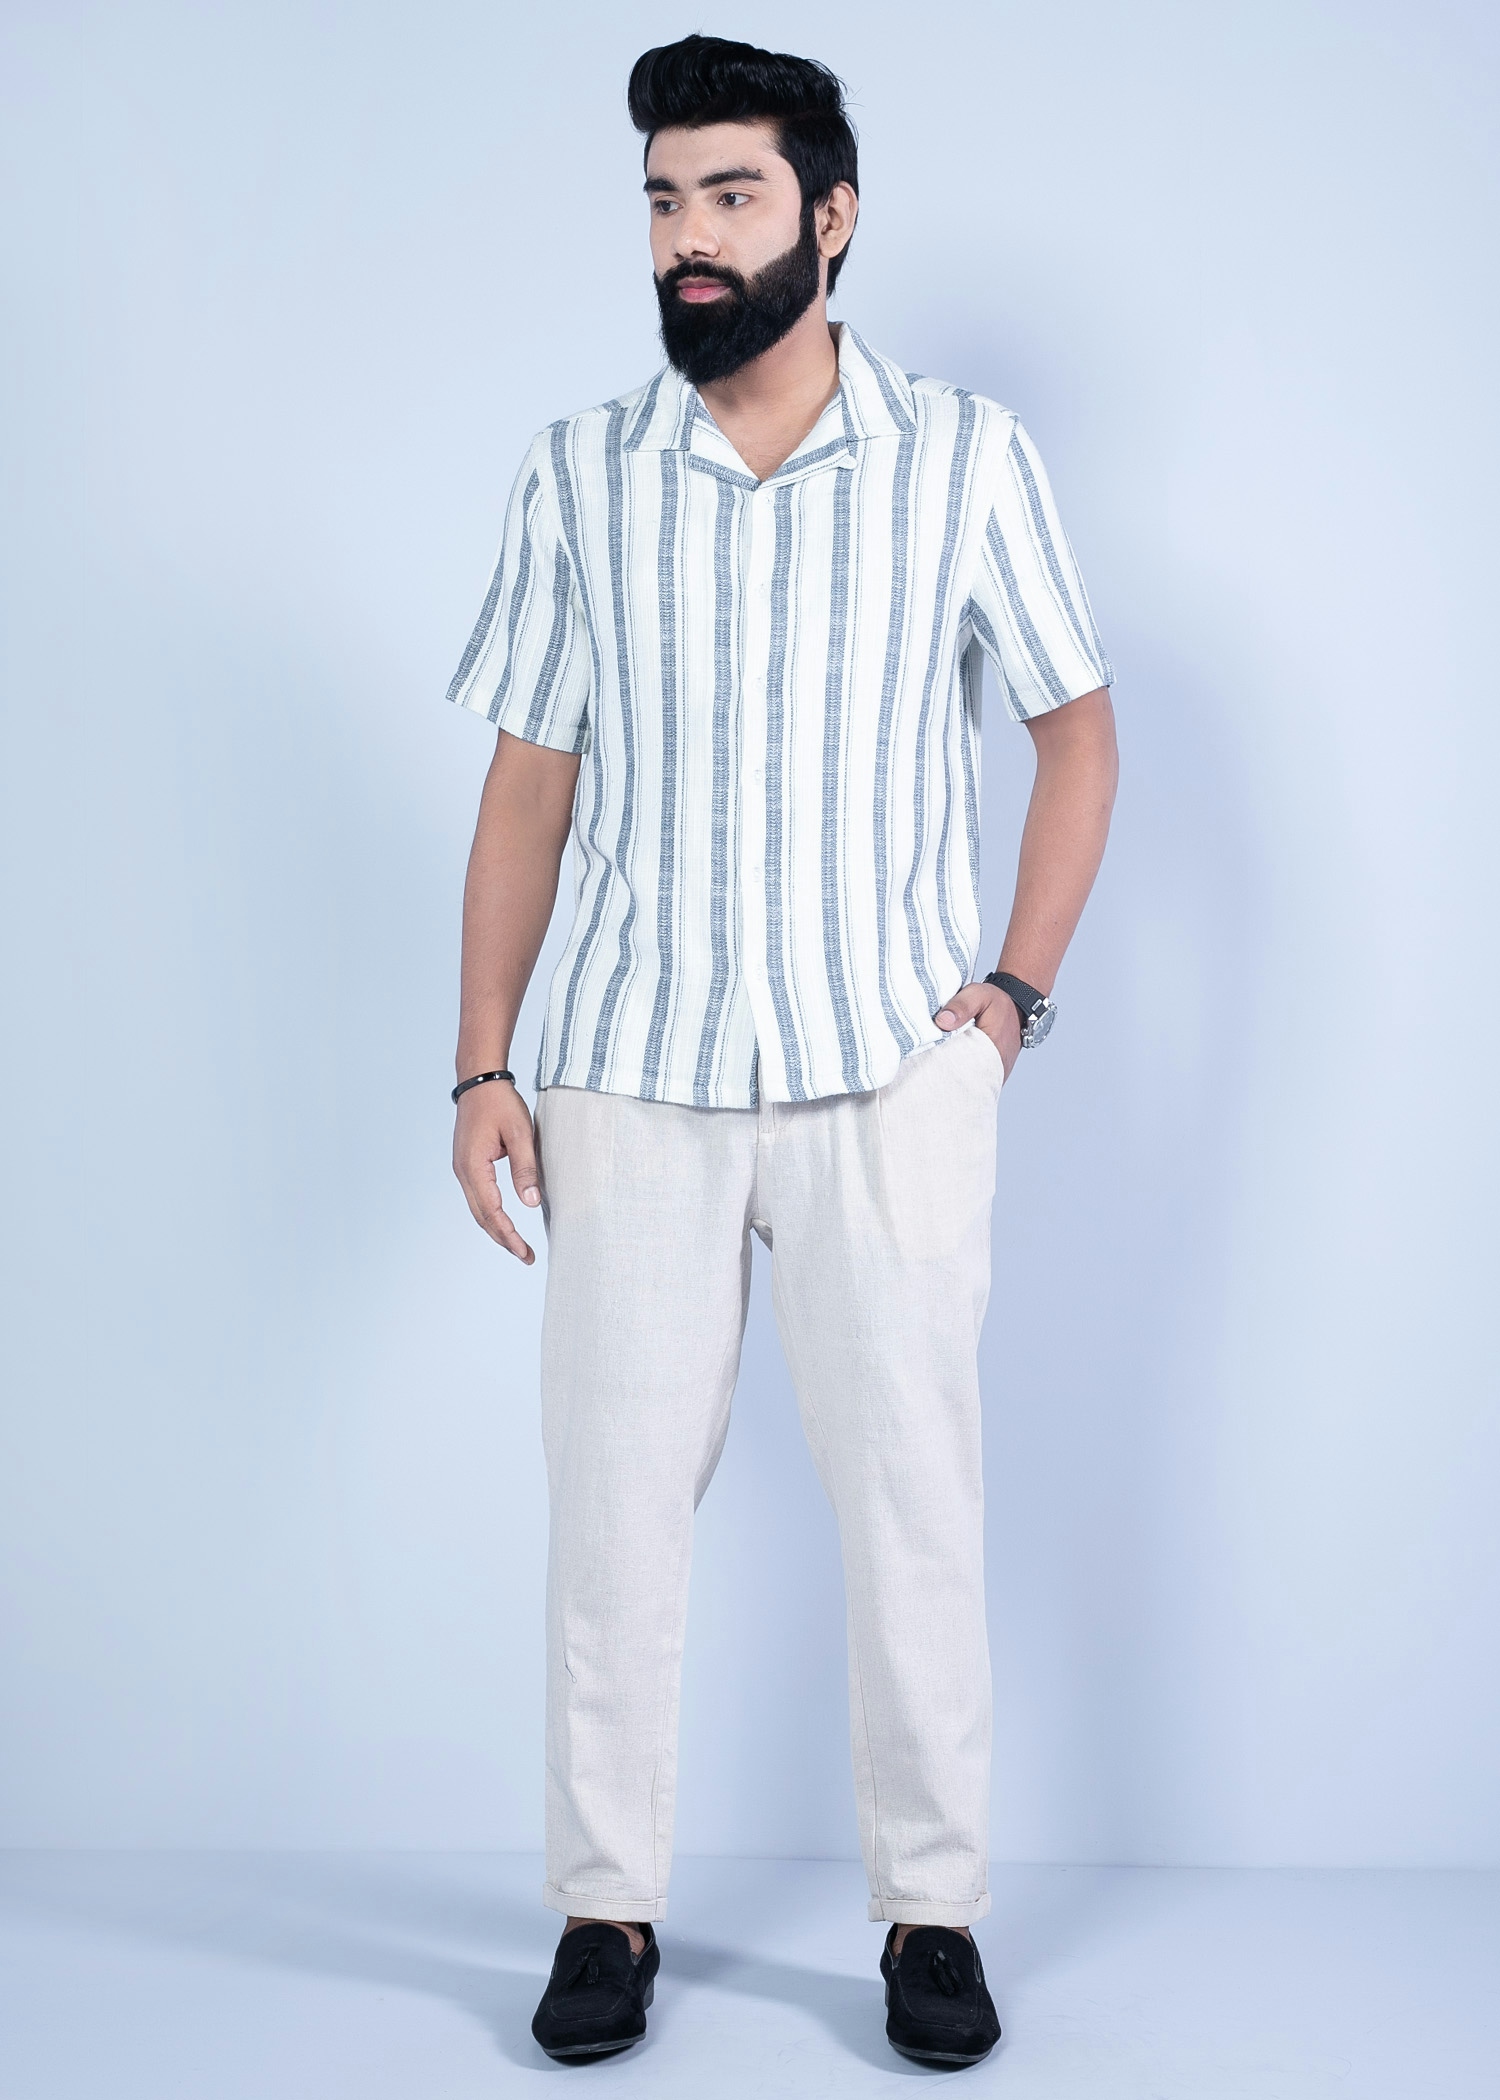 doha i cotton chino sand full front view